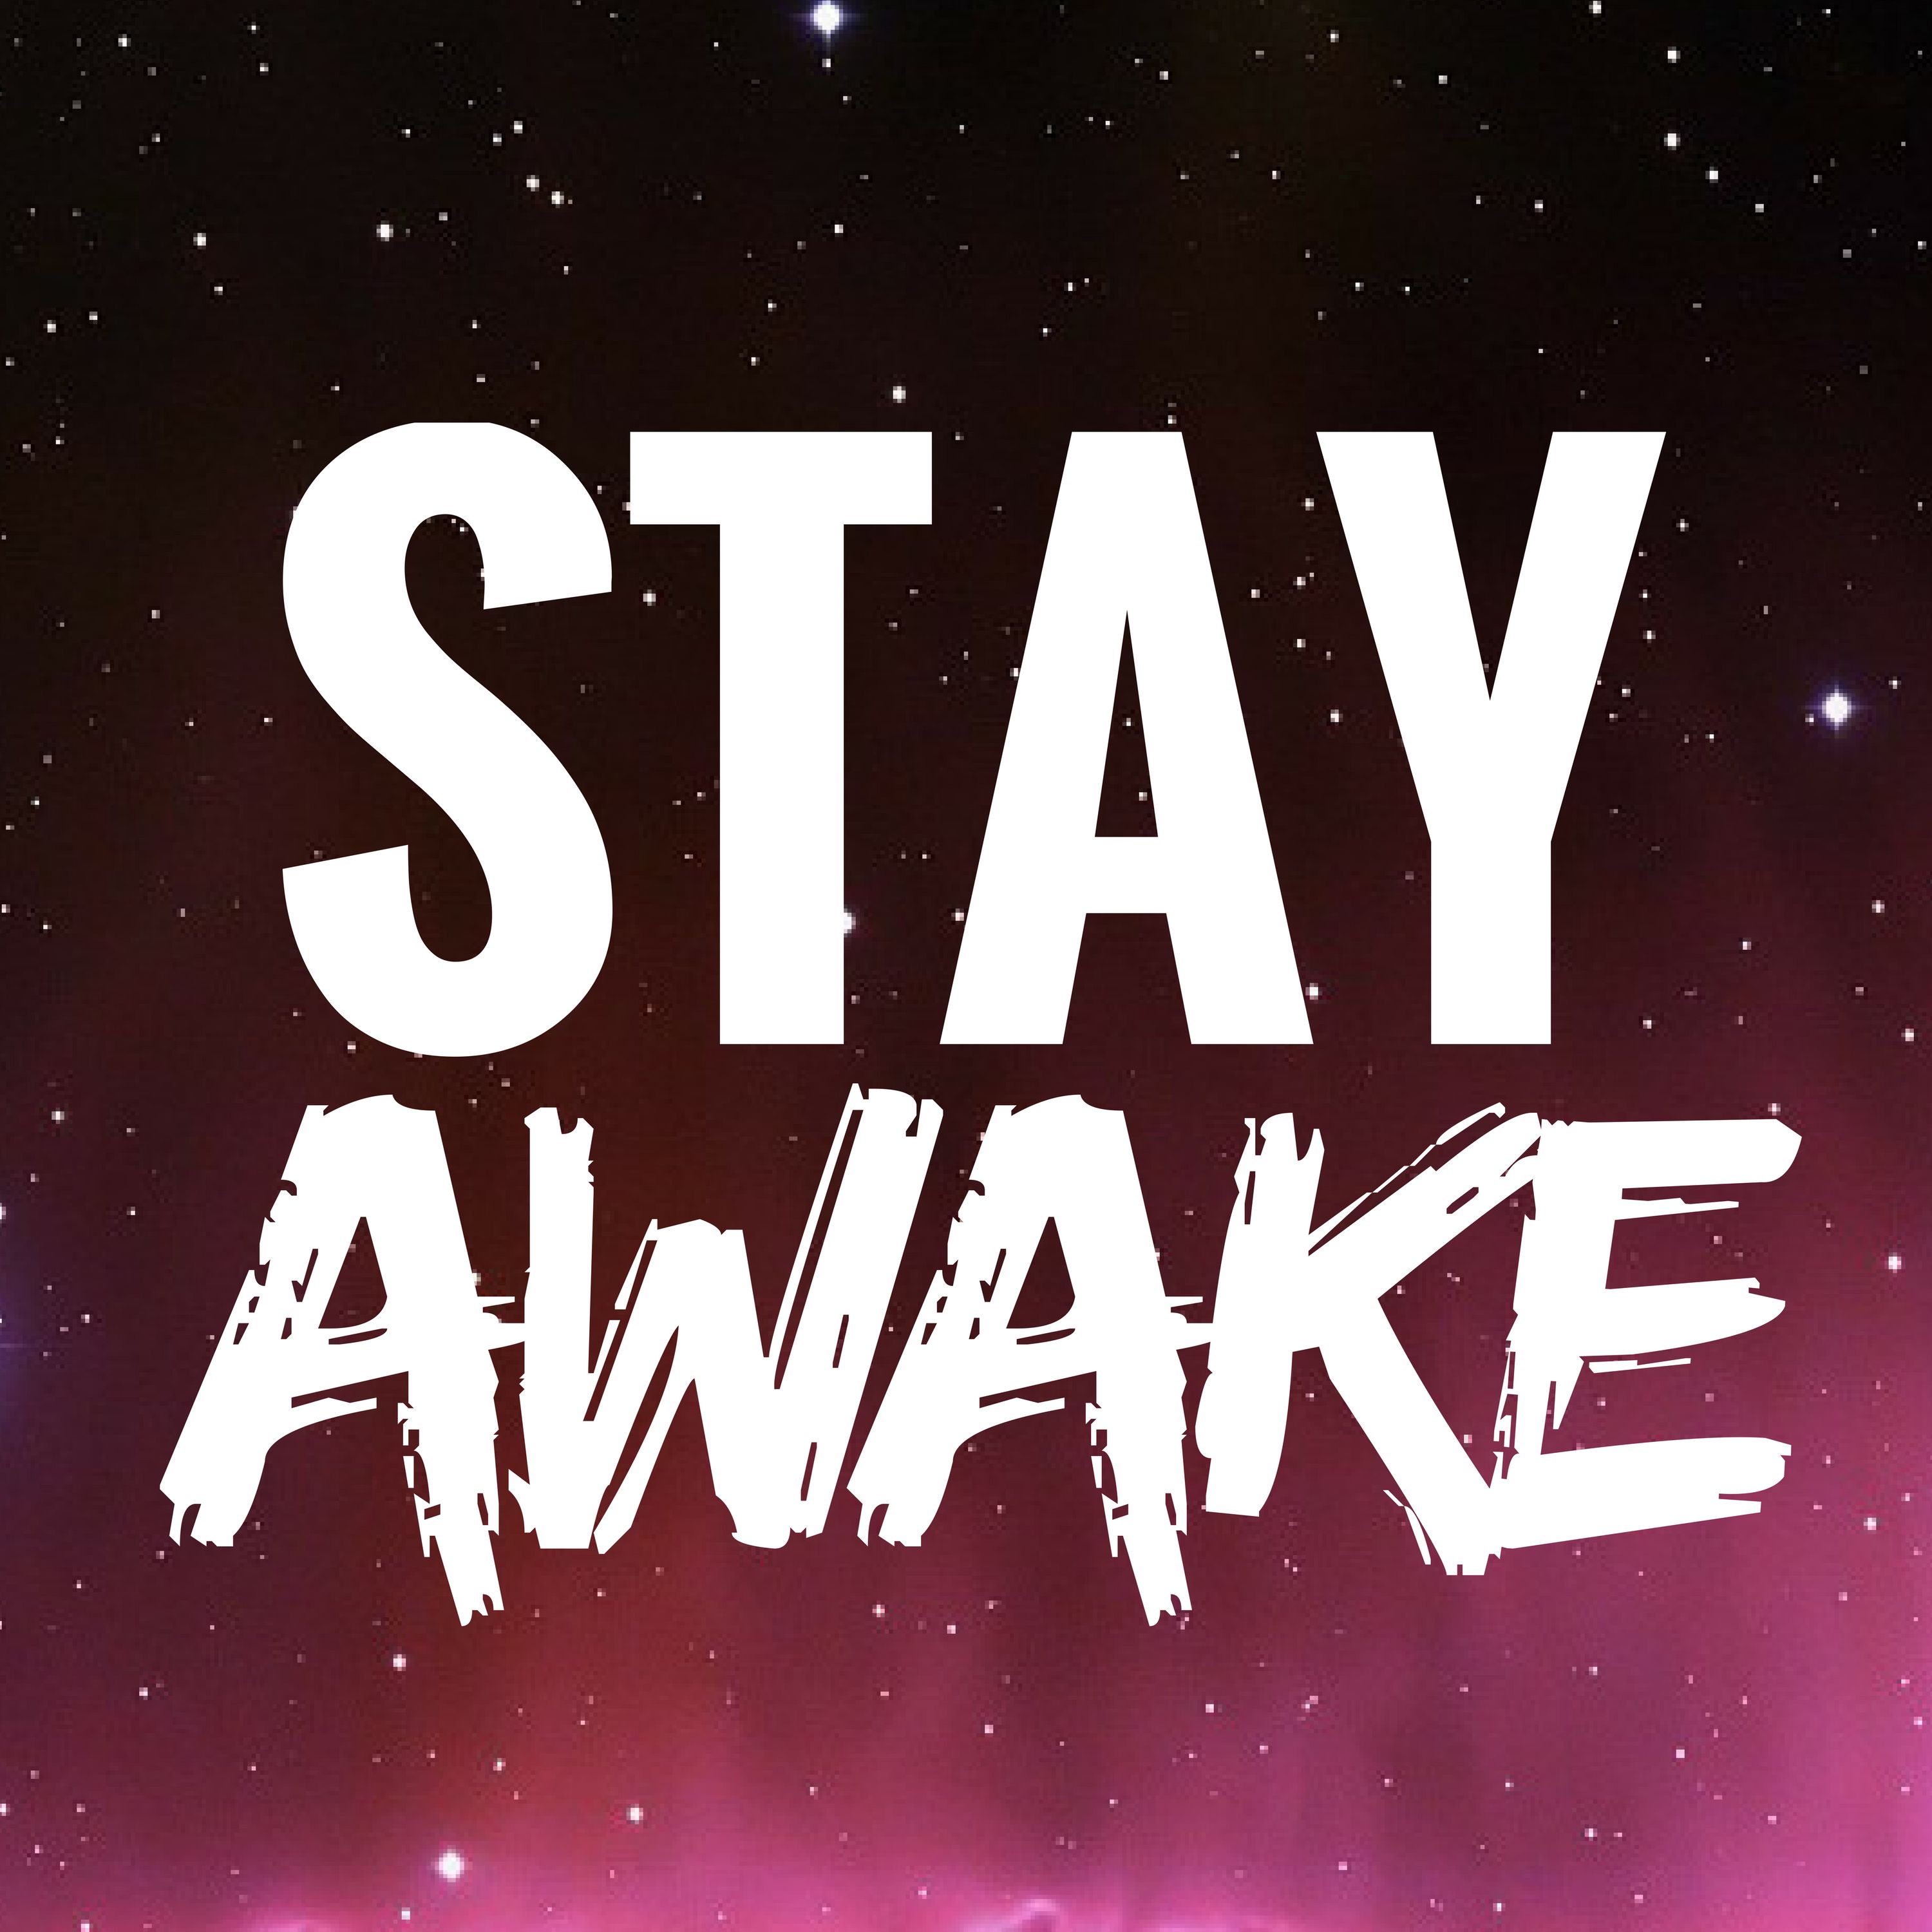 easy and legal ways to stay awake